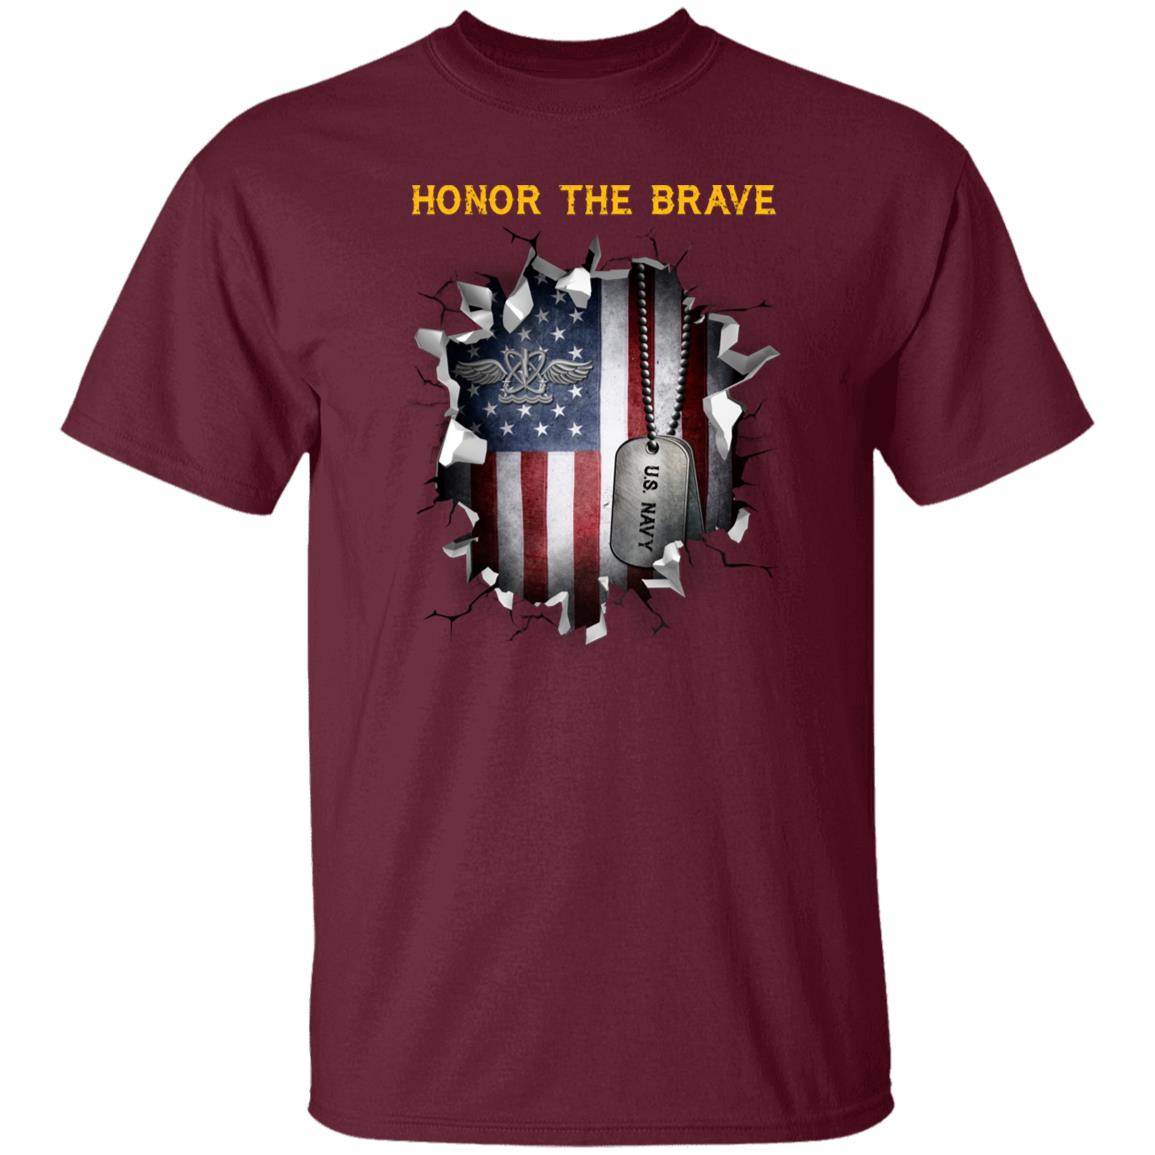 U.S Navy Naval aircrewman Navy AW - Honor The Brave Front Shirt